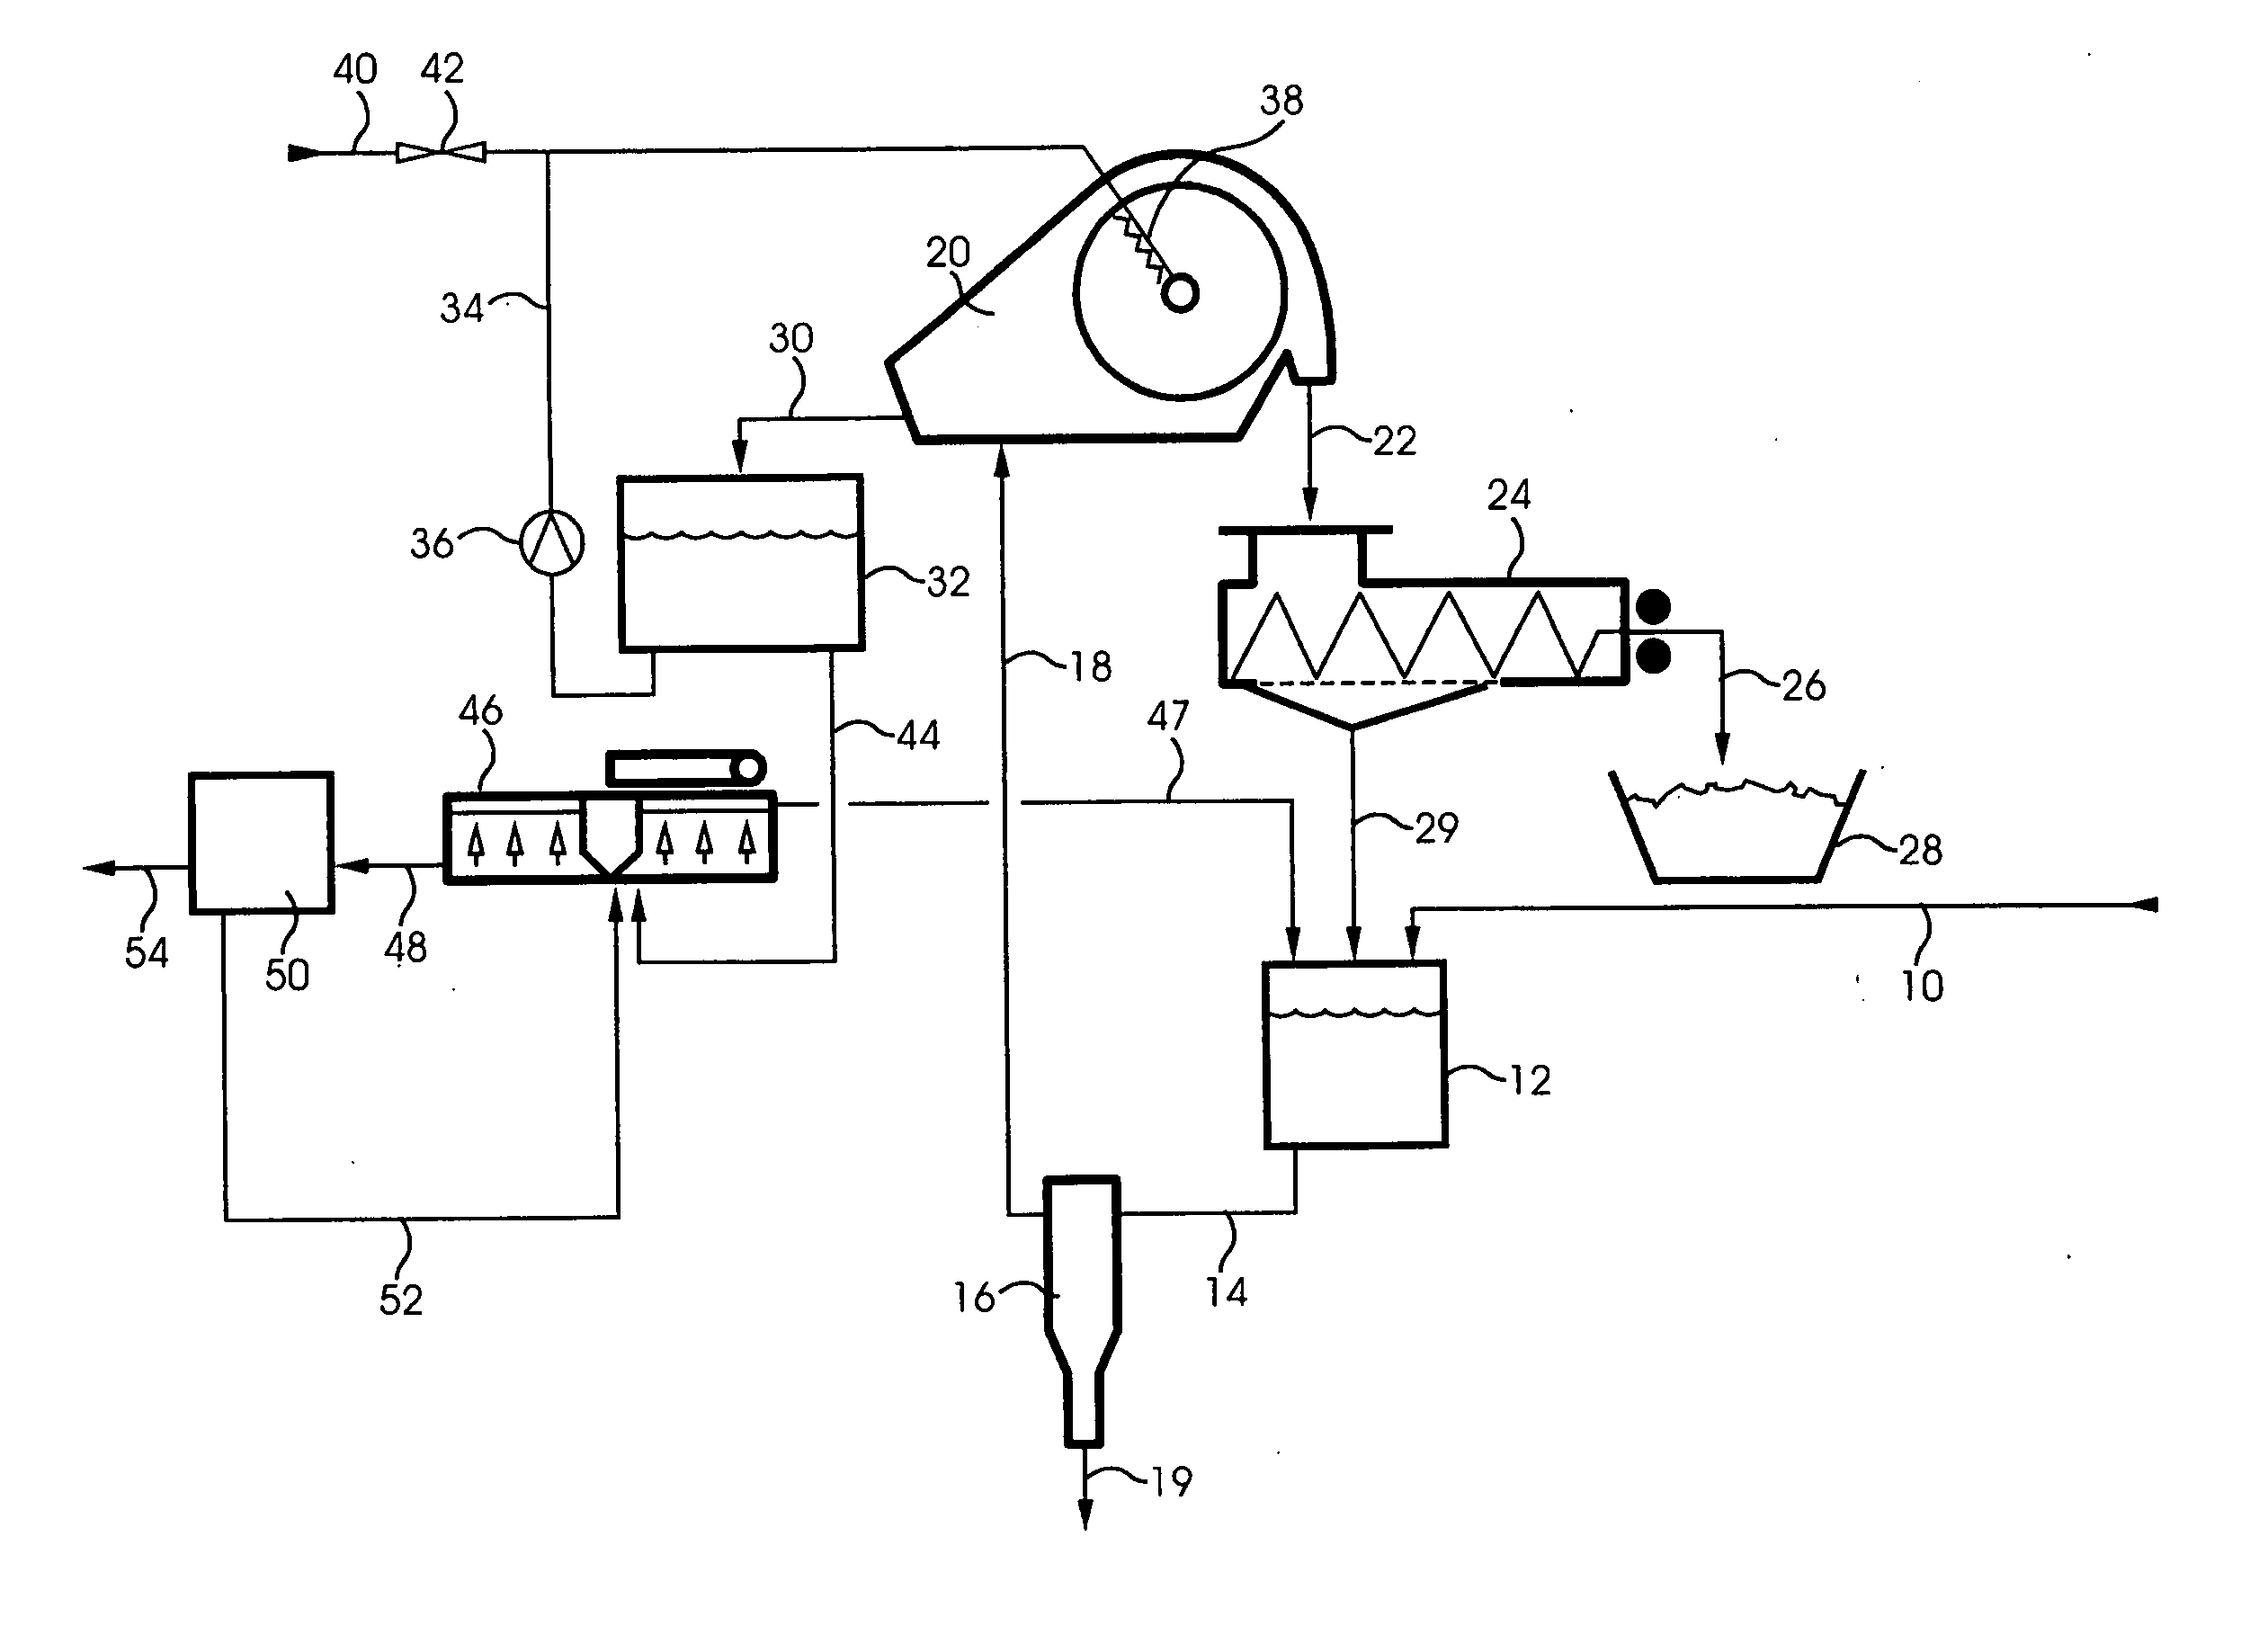 Apparatus and method for processing of animal manure wastewater